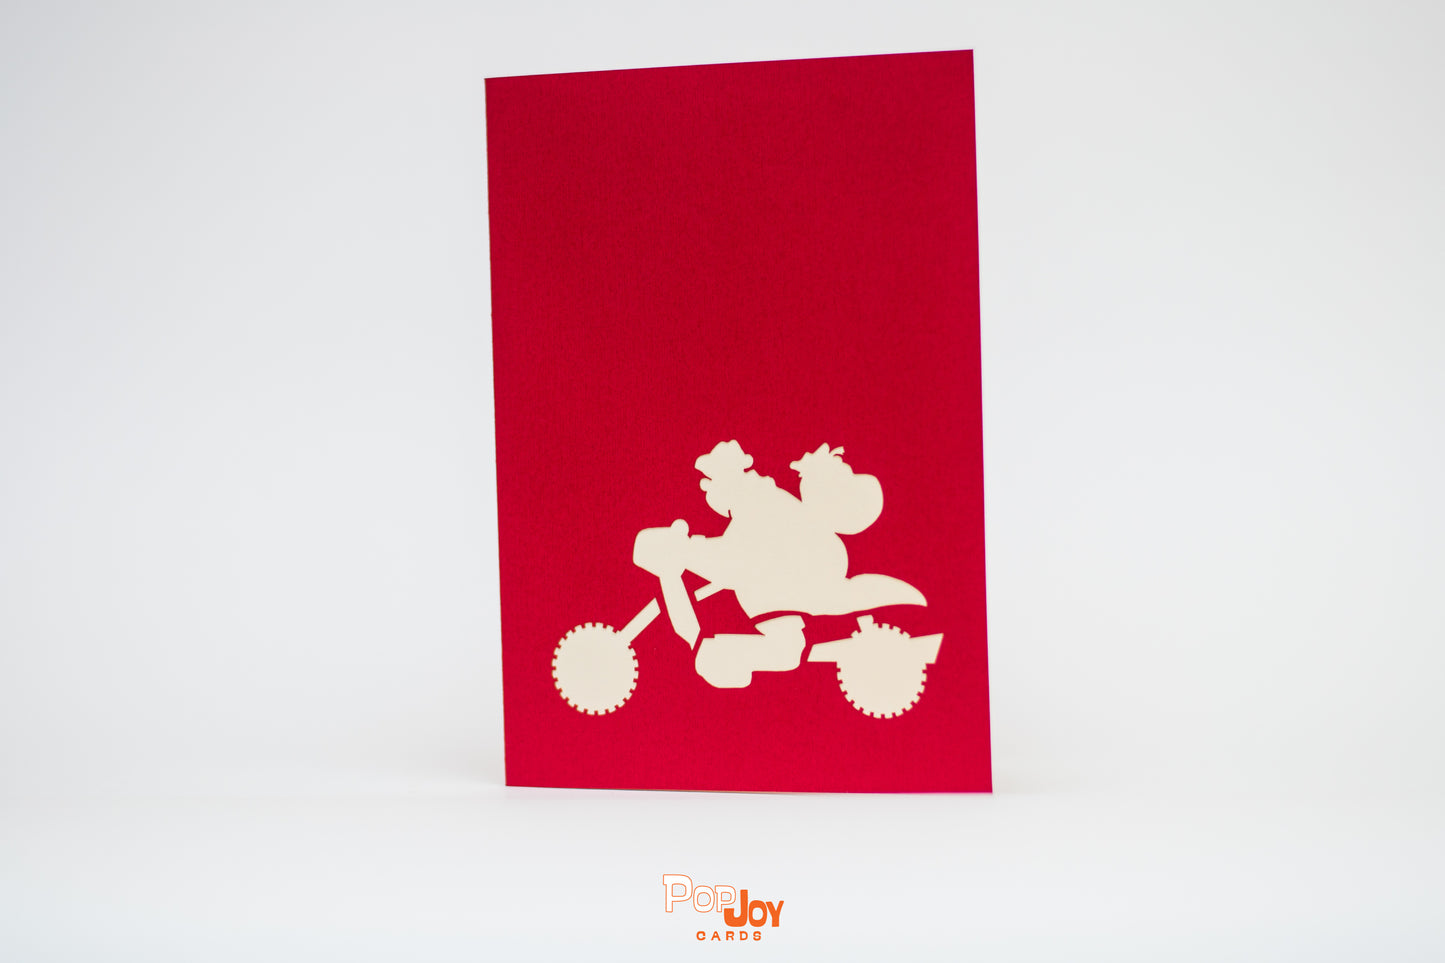 Red card with silhouette of Santa on his motorcycle in white